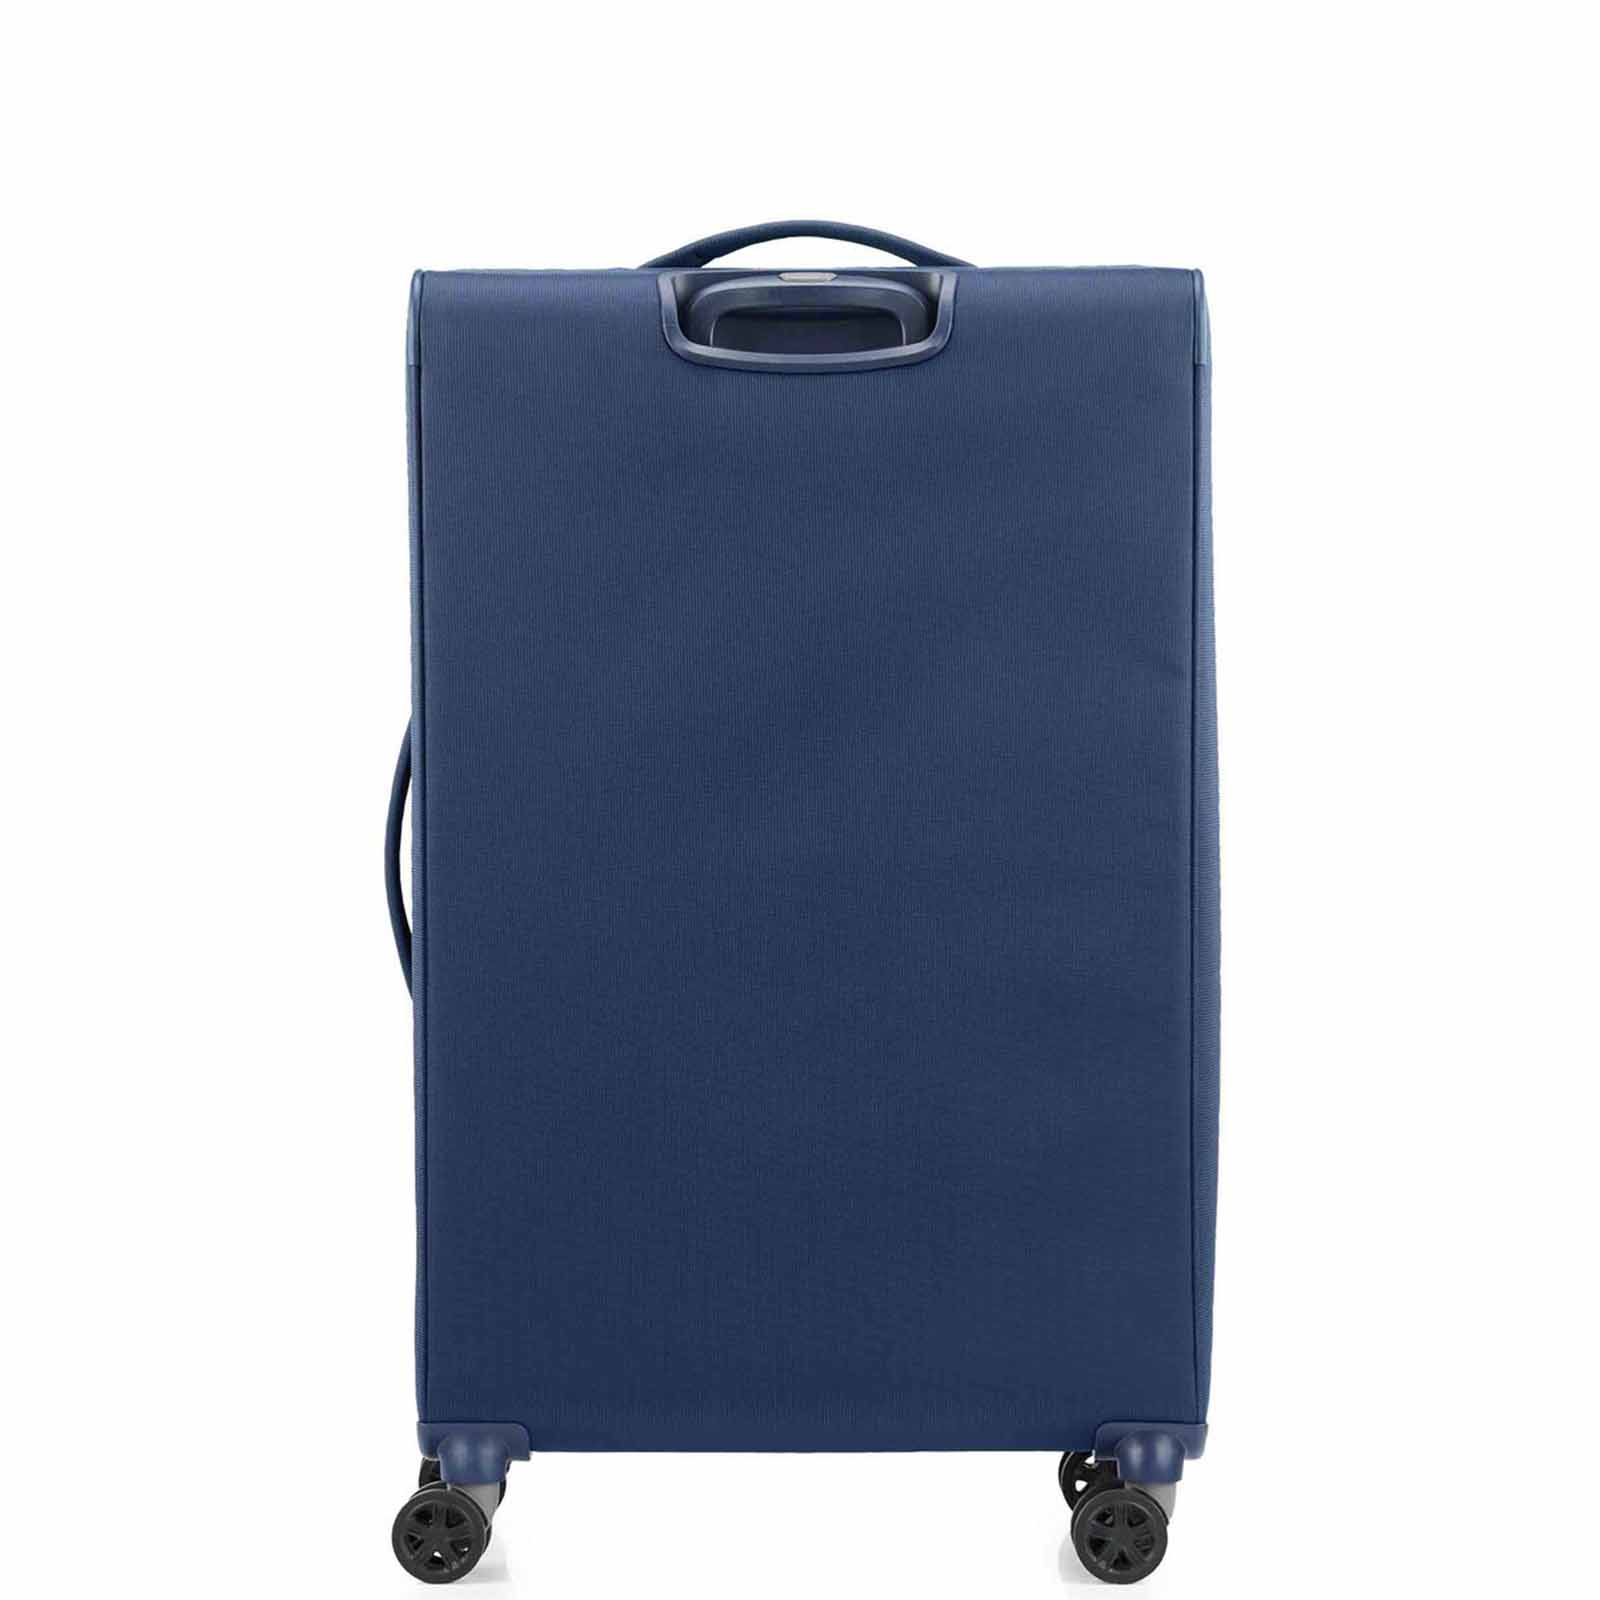 American-Tourister-Applite-4-Eco-82cm-Suitcase-Navy-Back